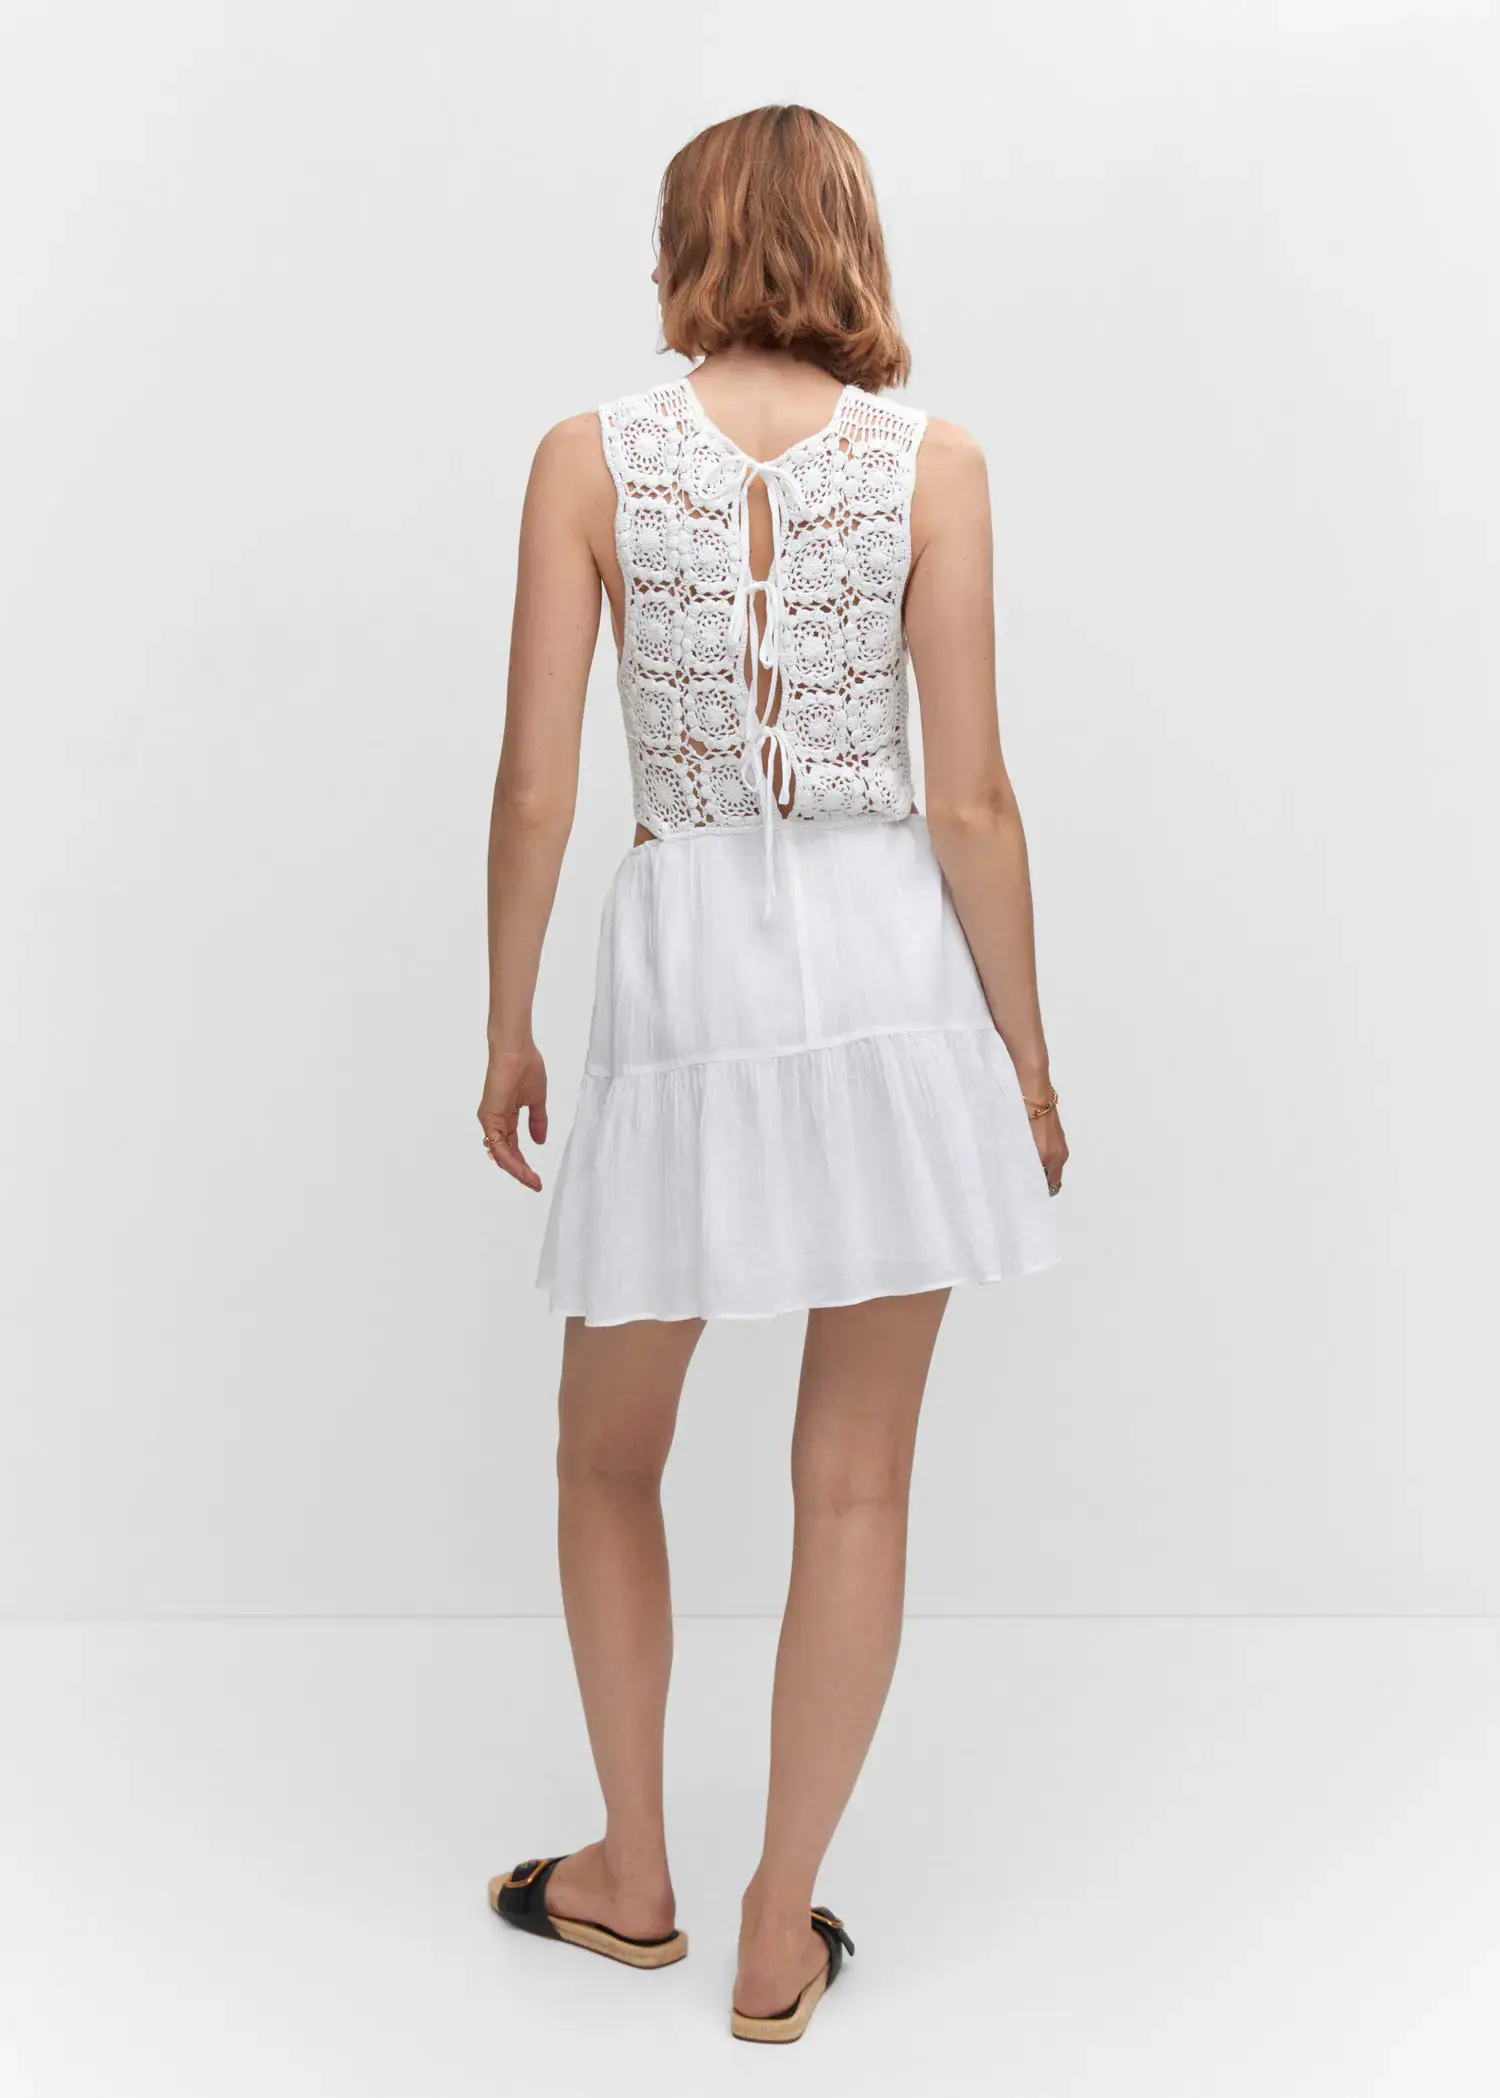 Mango Crochet dress with openings. a woman wearing a white dress standing in front of a white wall. 